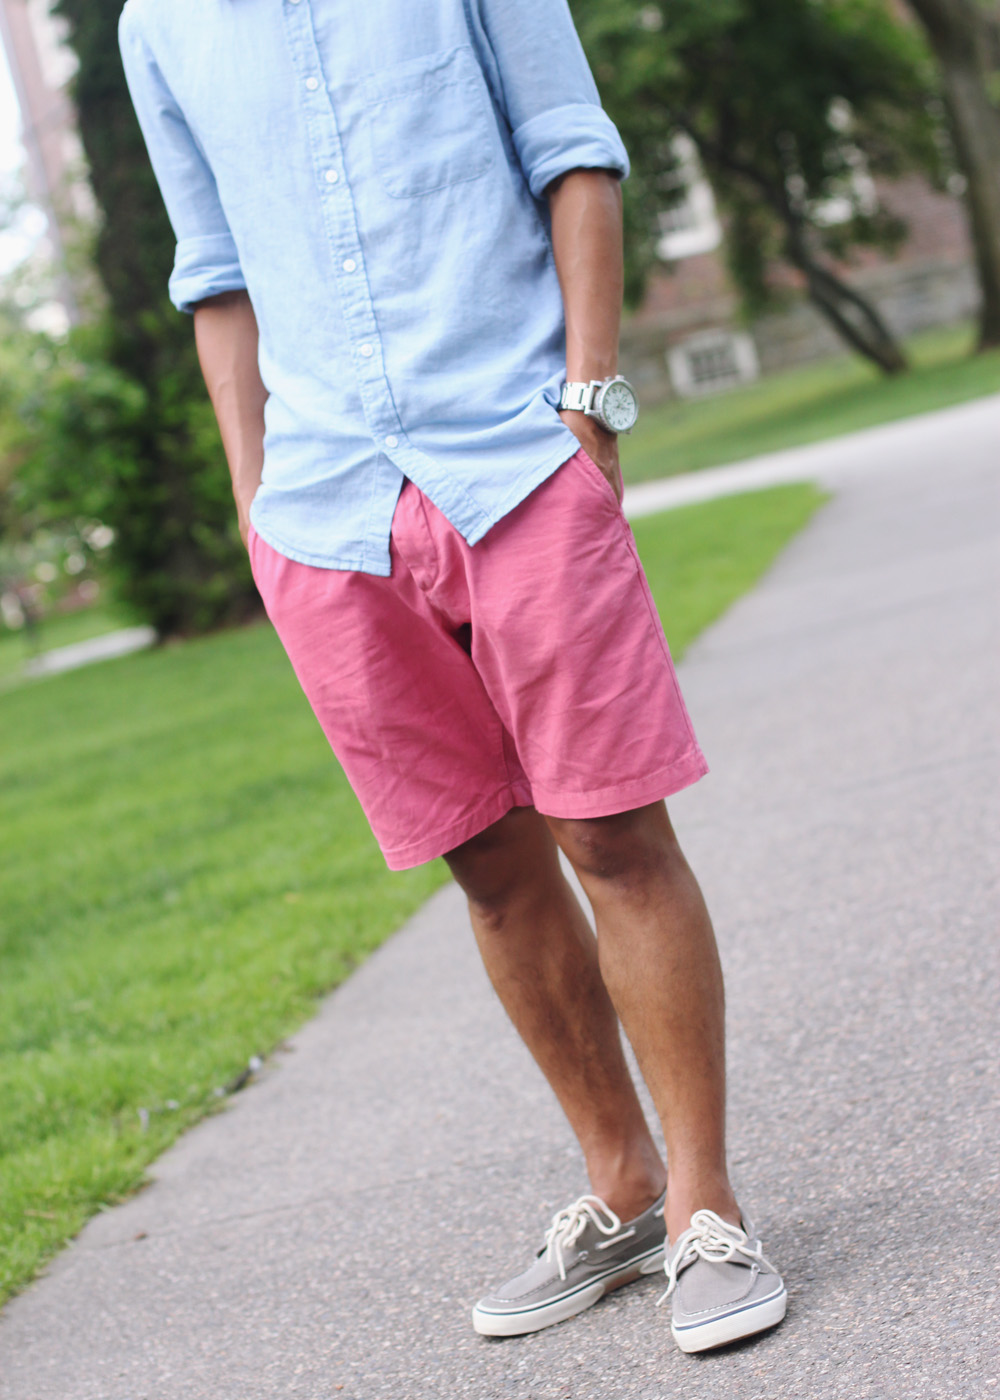 Skirt The Rules Blog; NYC fashion blogger; style blog; summer outfit photos; men's summer fashion; H&M chambray shirt; J.Crew pink chino shorts; Sperry Topsider gray boat shoes; Ray-Ban large tortoise Wayfarers Nixon Silver 51-50 Watch